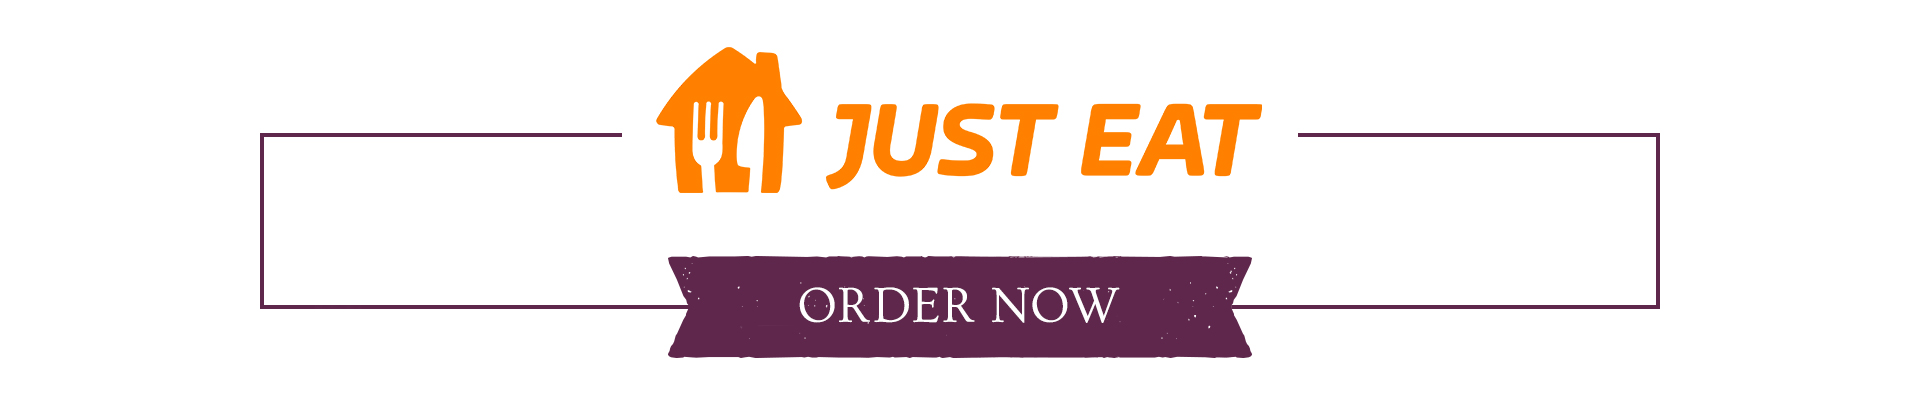 core-justeat-deliveroojusteat-thin-banner.jpg